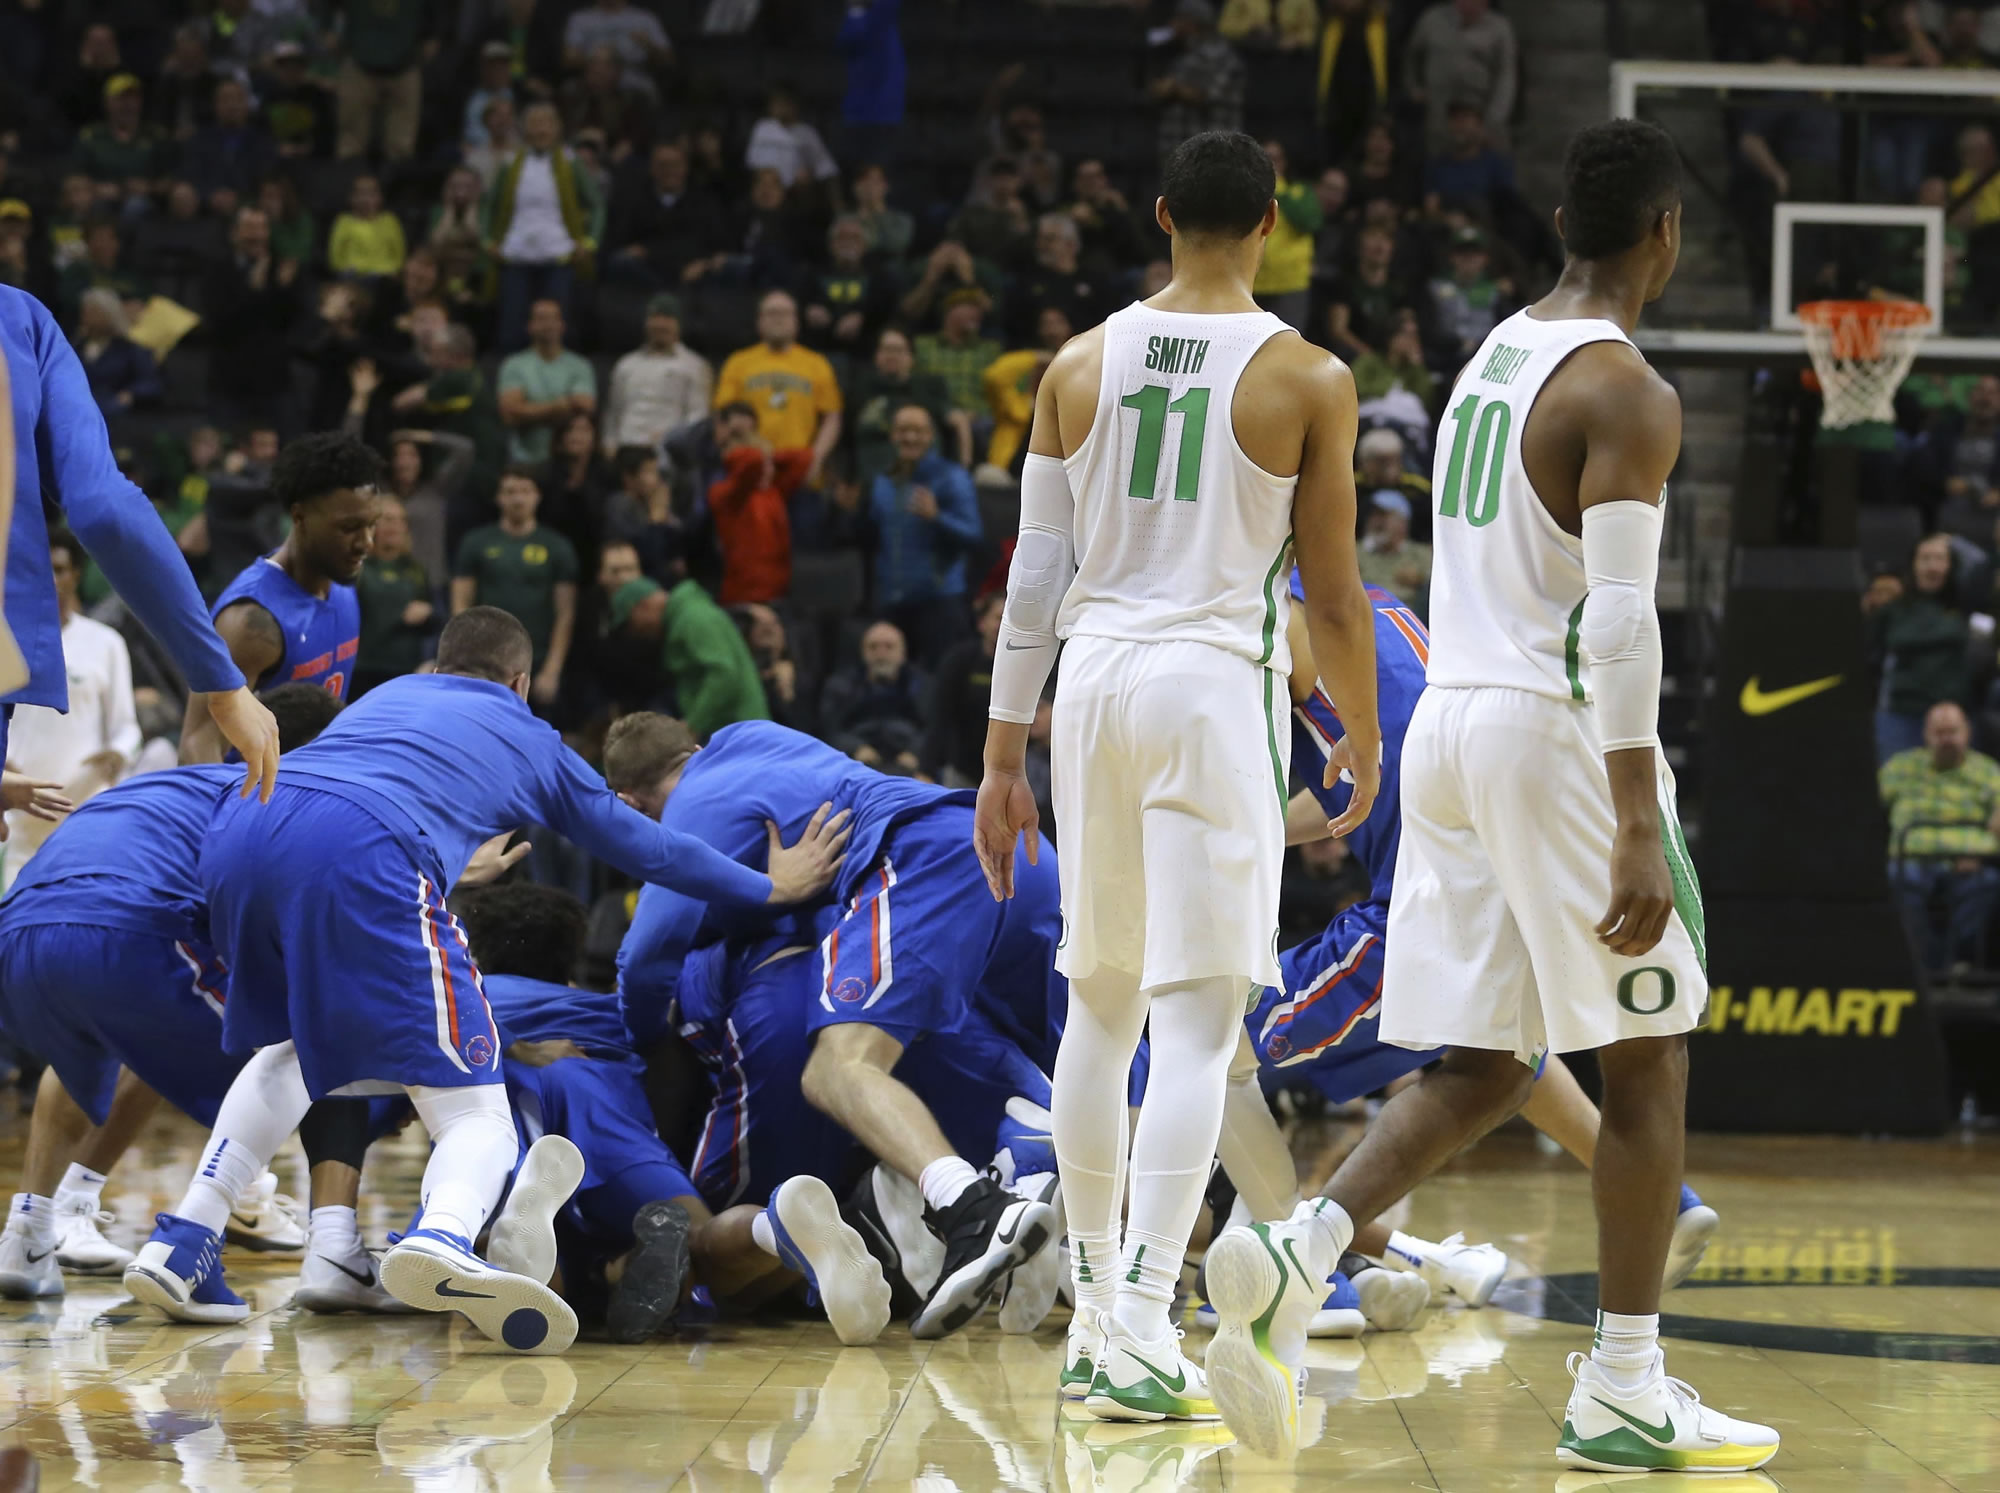 Oregon's Keith Smith (11) and Victor Bailey Jr. (10) leave the court as Boise State players pile on Lexus Williams after his 40-foot buzzer-beater defeated Oregon 73-70, snapping the Ducks' 46-game home winning streak, in Eugene, Ore., Friday, Dec. 1, 2017.